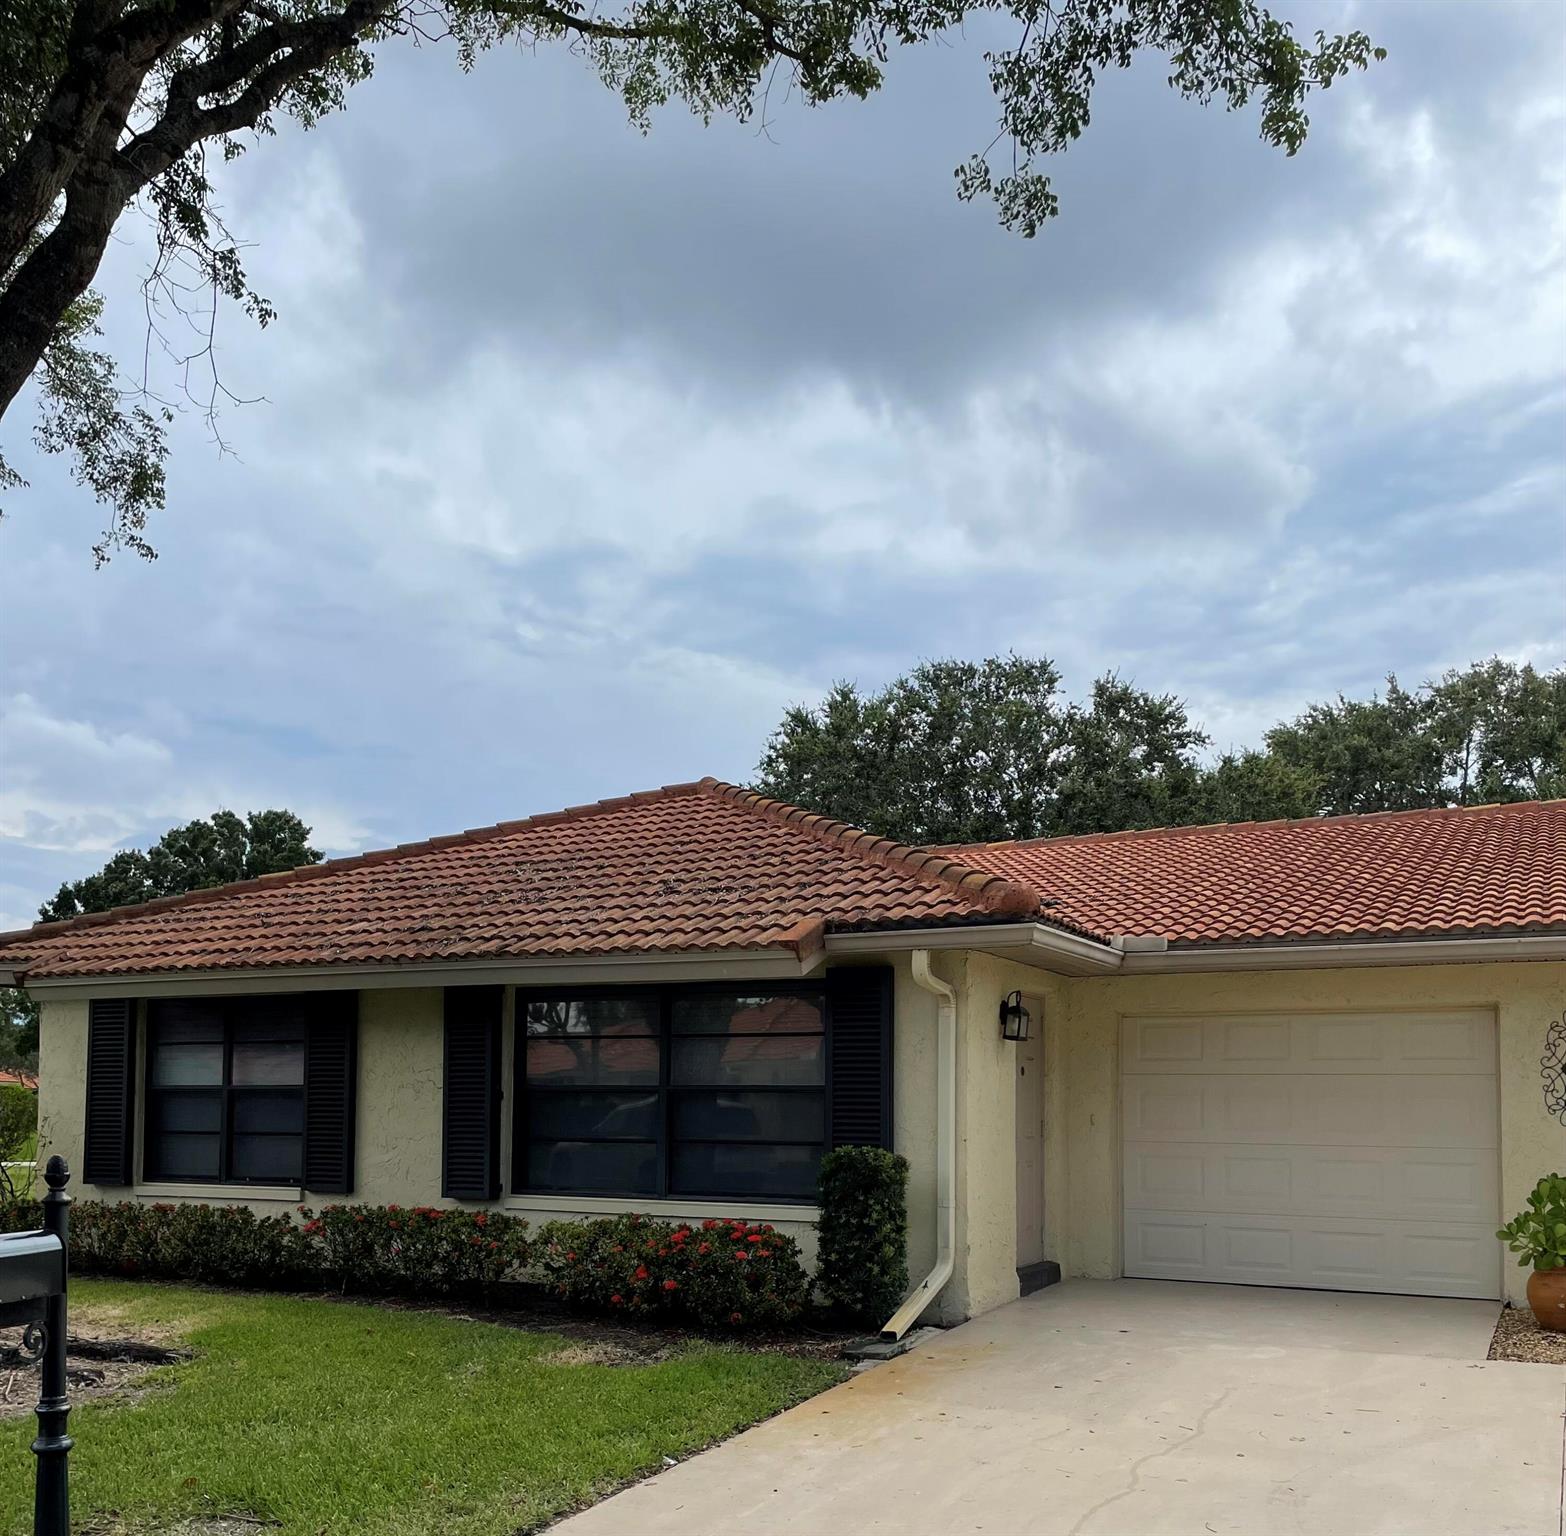 Beautifully updated 2-bedroom 2 bath 1 car garage villa in Bent Tree West 55+gated community. This unit is located very close to the clubhouse and community pool. Quiet and cozy community, but very close to shopping, restaurants and the beach.